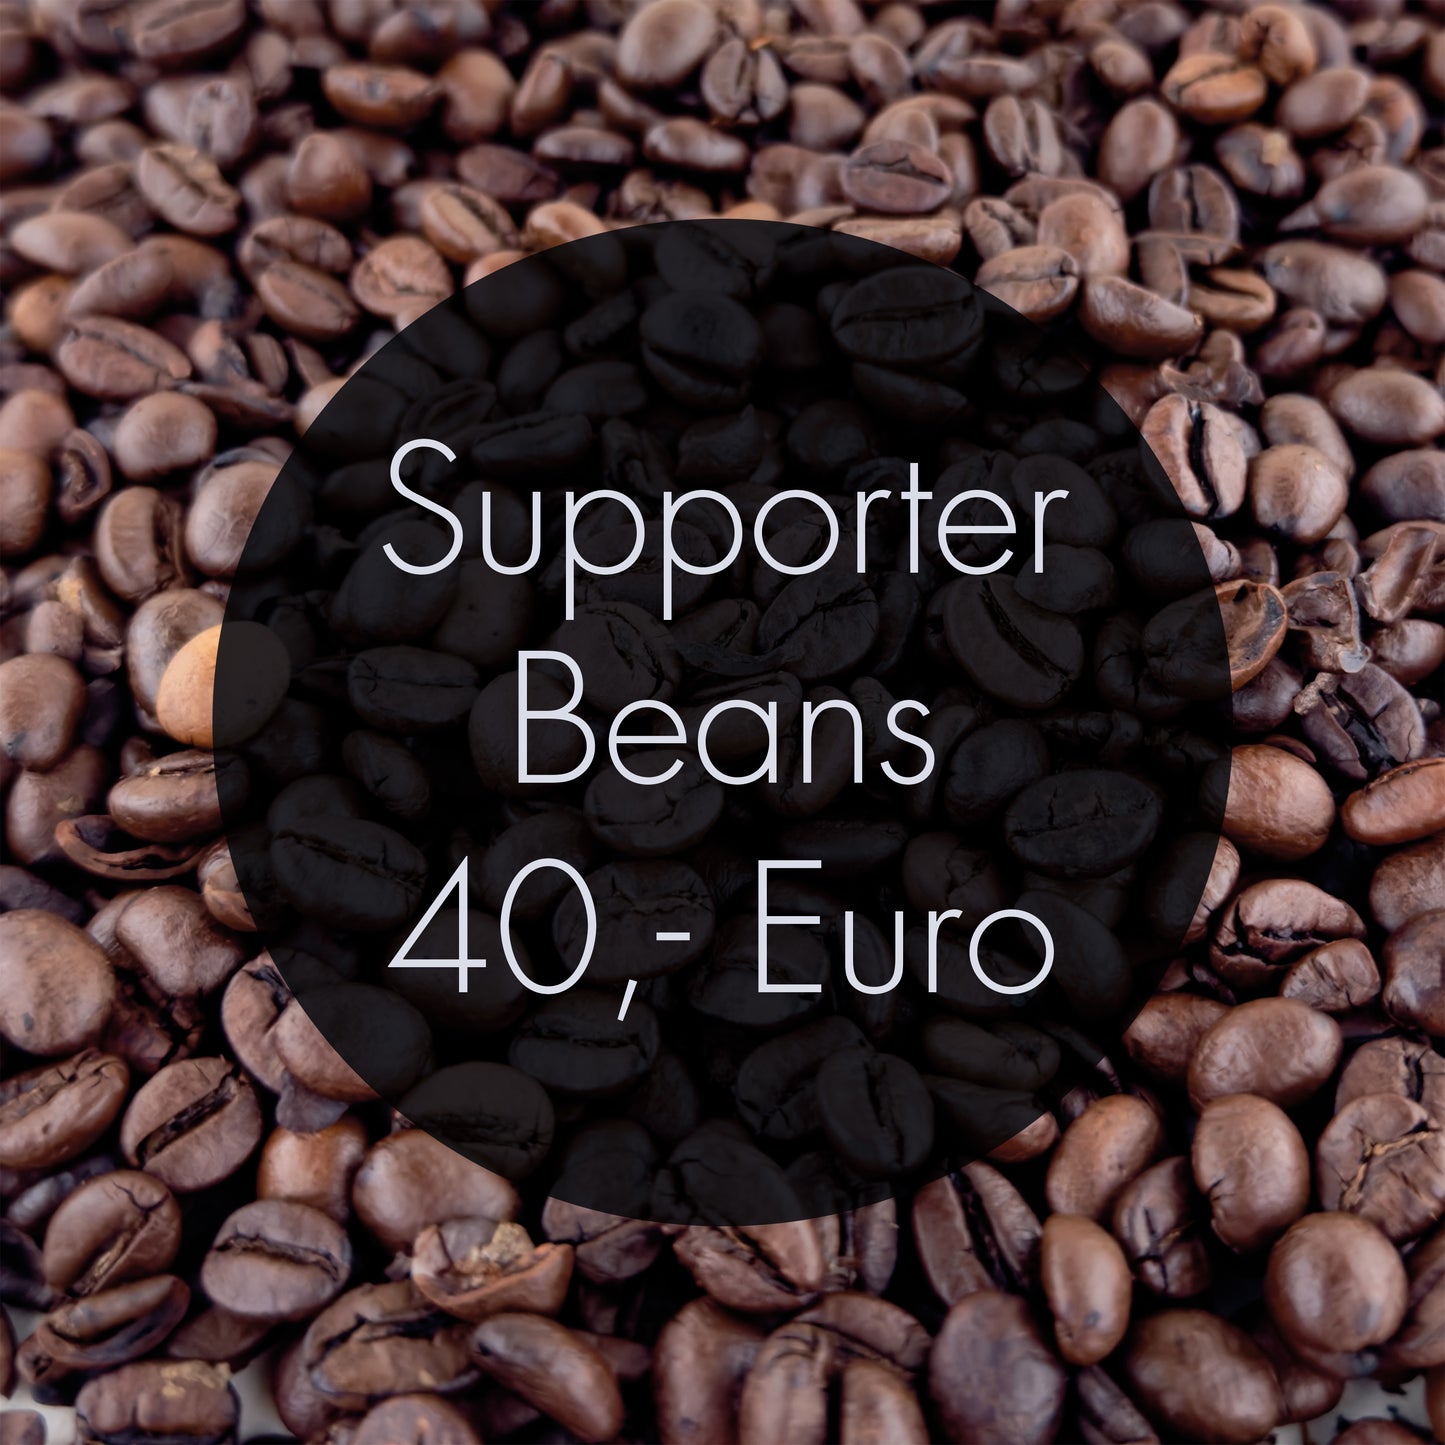 Supporter Beans 40,- Euro